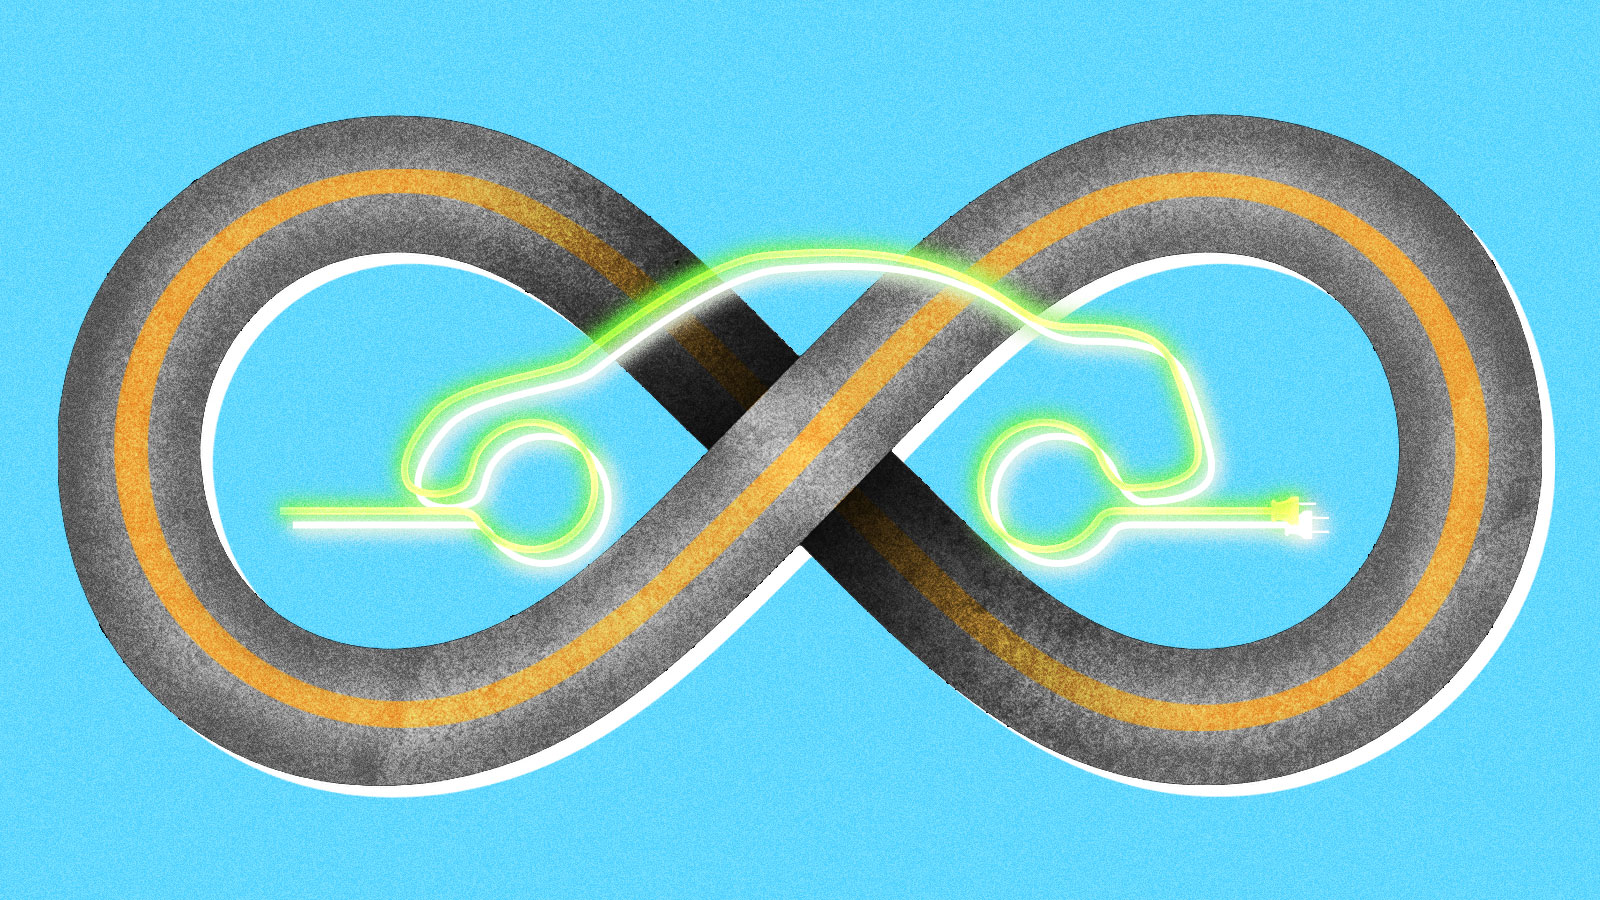 A road in the shape of an infinity symbol with a neon outline of a car with a power cable